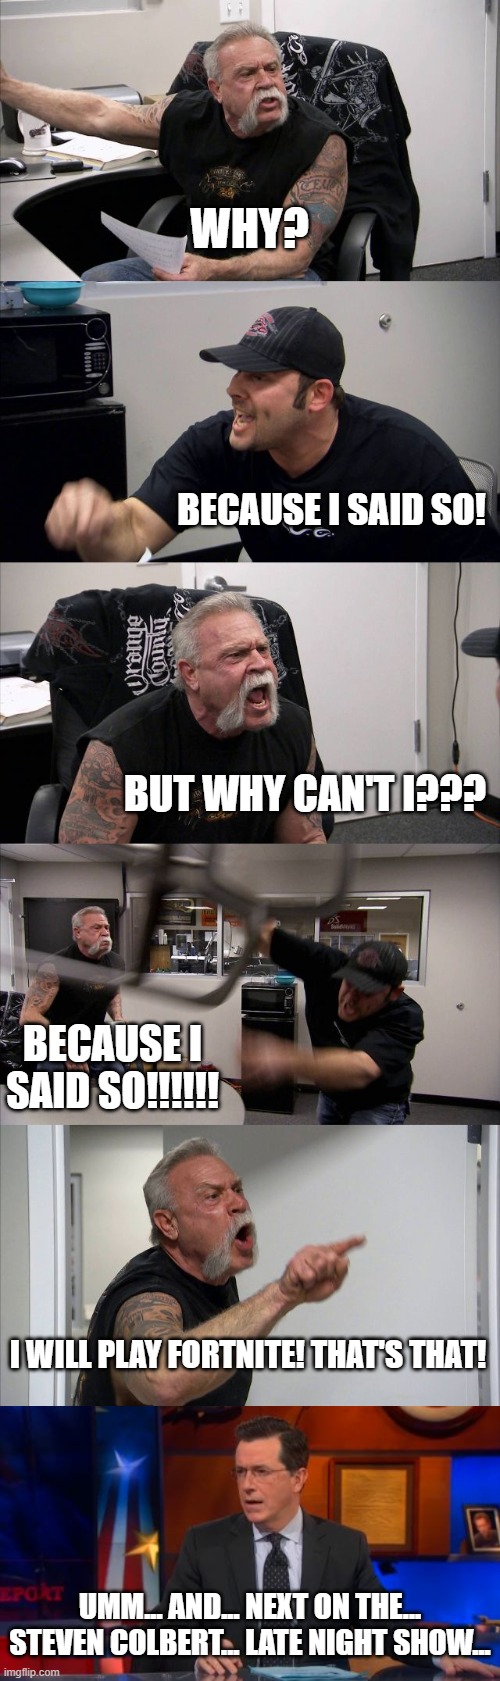 He should purchase Premium, with no ads. | WHY? BECAUSE I SAID SO! BUT WHY CAN'T I??? BECAUSE I SAID SO!!!!!! I WILL PLAY FORTNITE! THAT'S THAT! UMM... AND... NEXT ON THE... STEVEN COLBERT... LATE NIGHT SHOW... | image tagged in memes,american chopper argument,speechless colbert face | made w/ Imgflip meme maker